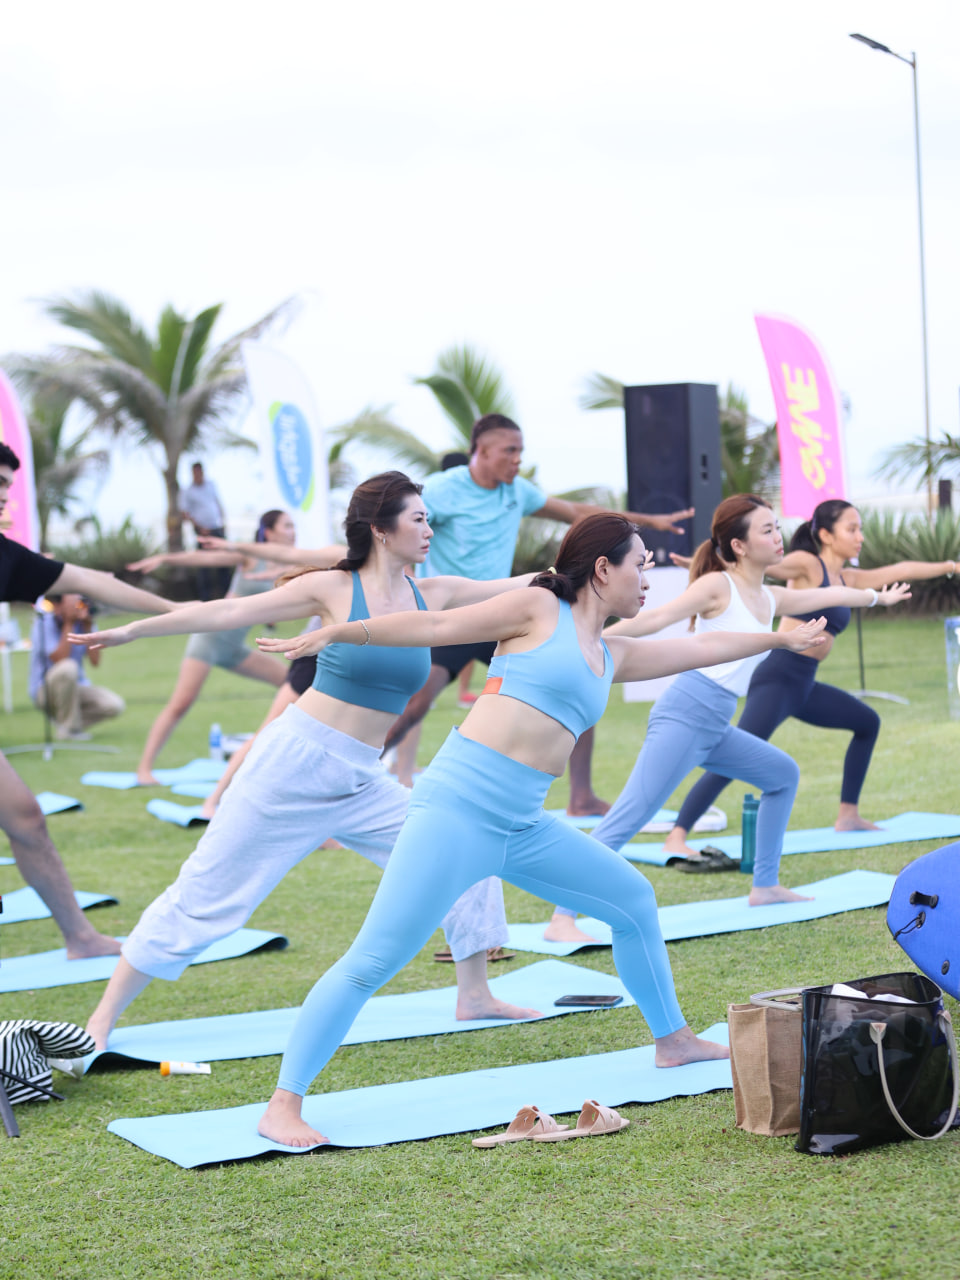 All the fitness and sports enthusiasts enjoyed the fresh air while getting a good workout in Joanne's yoga session. 